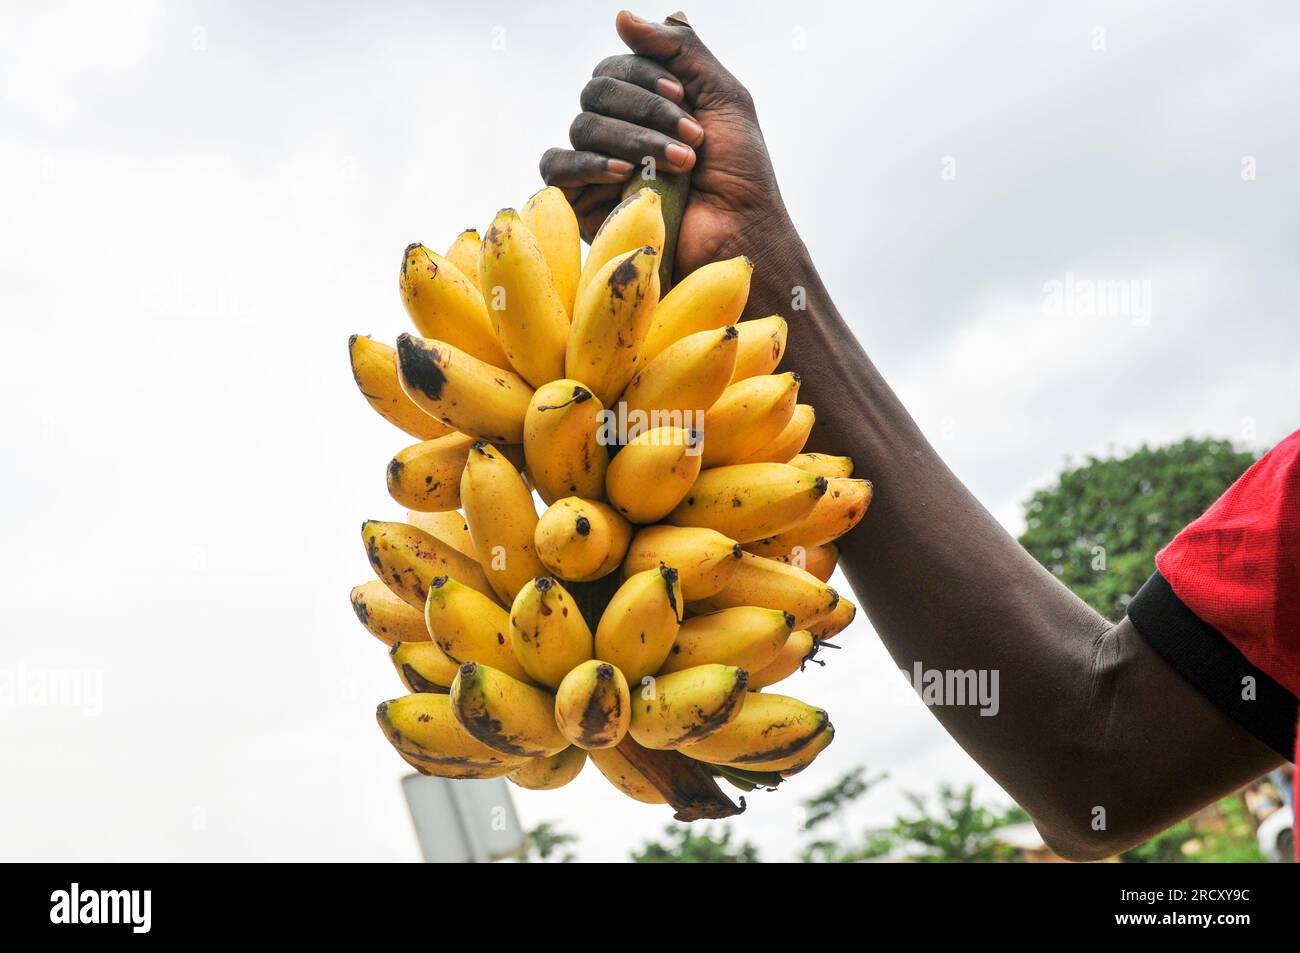 A young Congolese farmer displays a bunch of ripe bananas in a village on the road to Sibiti (southern Congo), 12 January 2017 Stock Photo